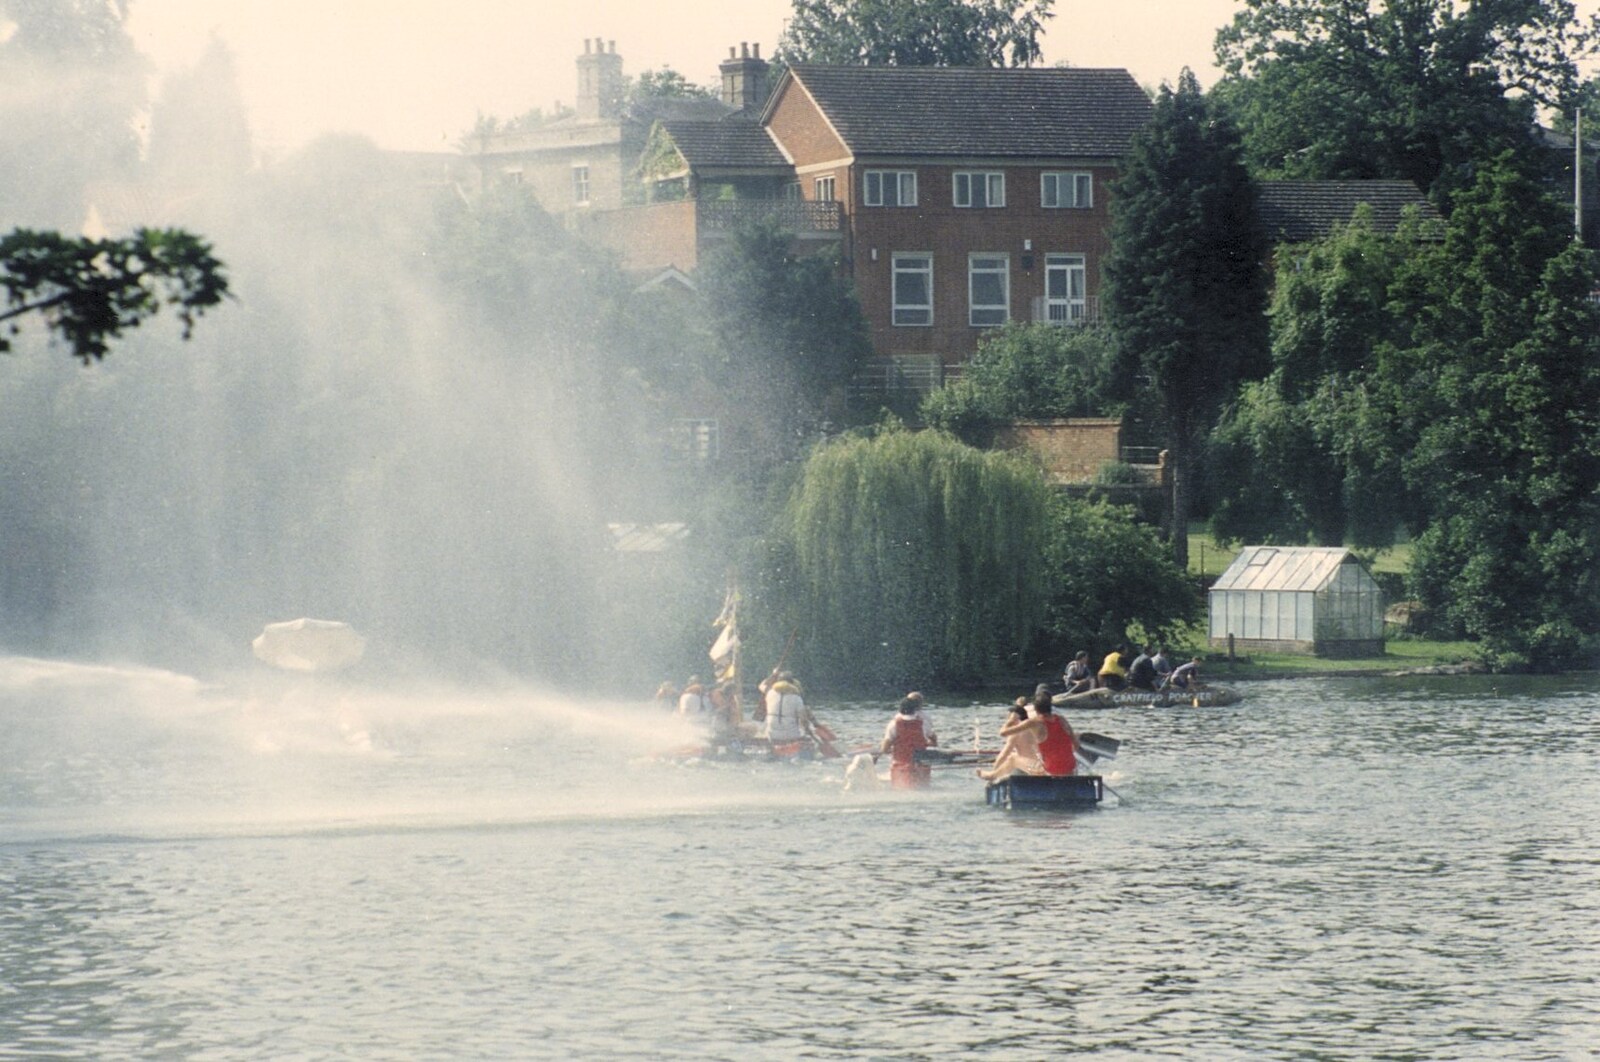 The rafts paddle through a wall of spray from firehoses from A Raft Race on the Mere, Diss, Norfolk - 2nd June 1990